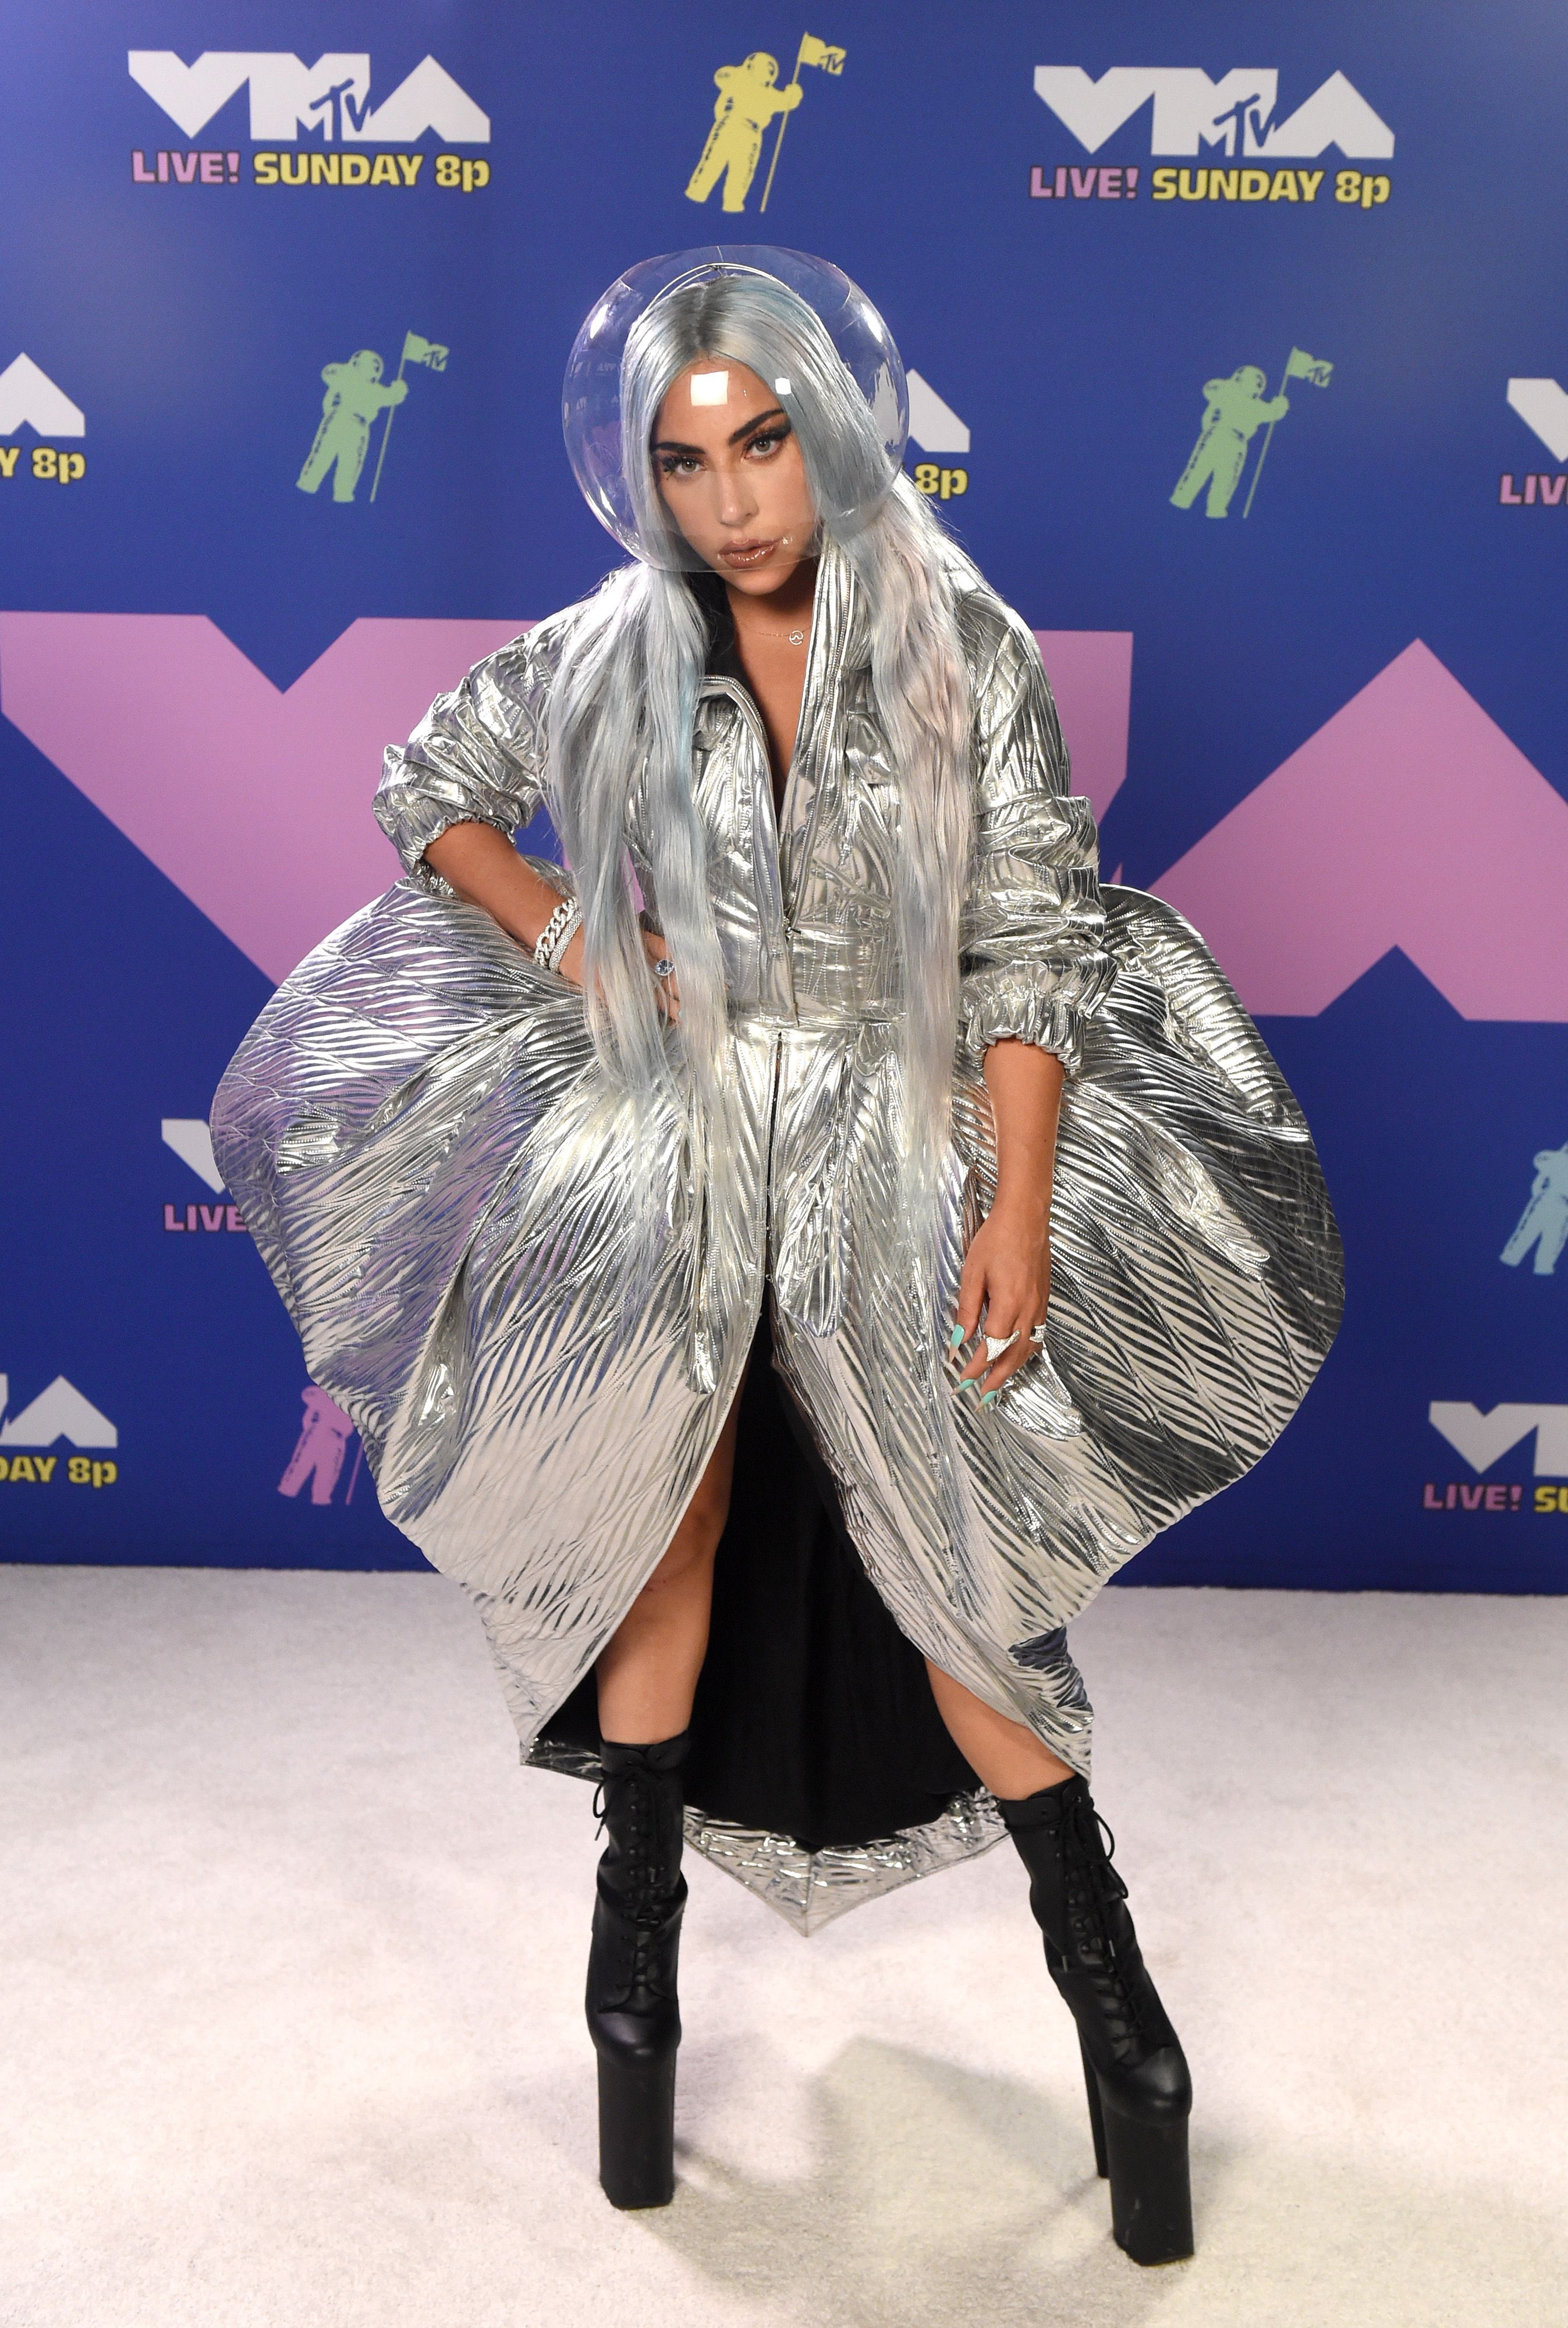 Lady Gaga’s 9 Face Masks Won Her Best-Dressed At The VMAs